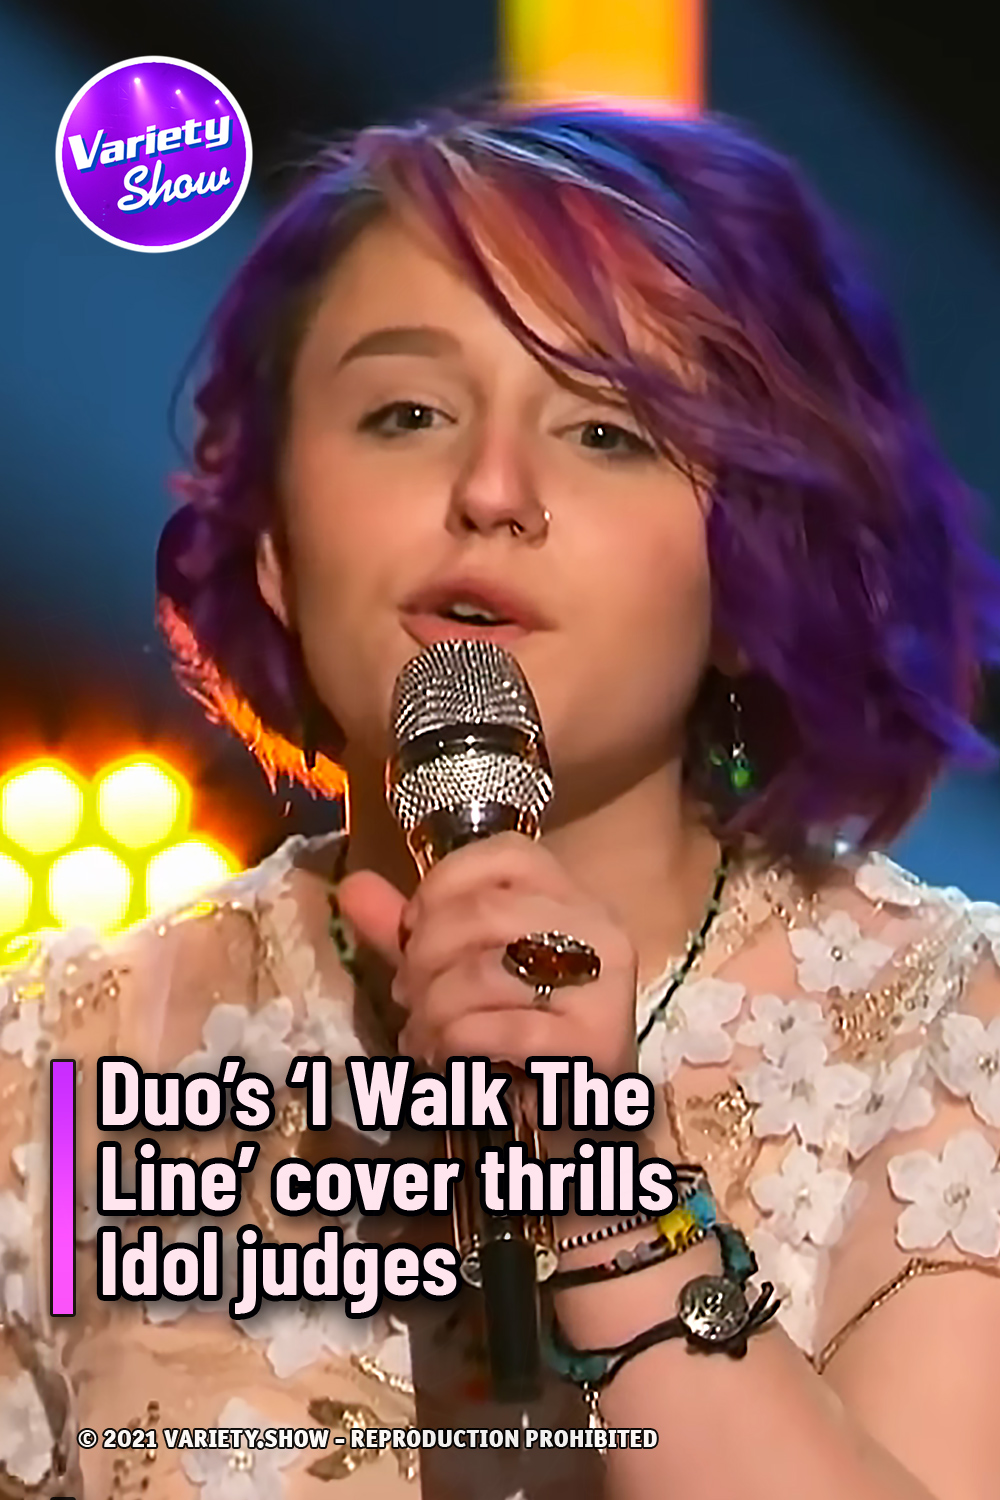 Duo’s ‘I Walk The Line’ cover thrills Idol judges